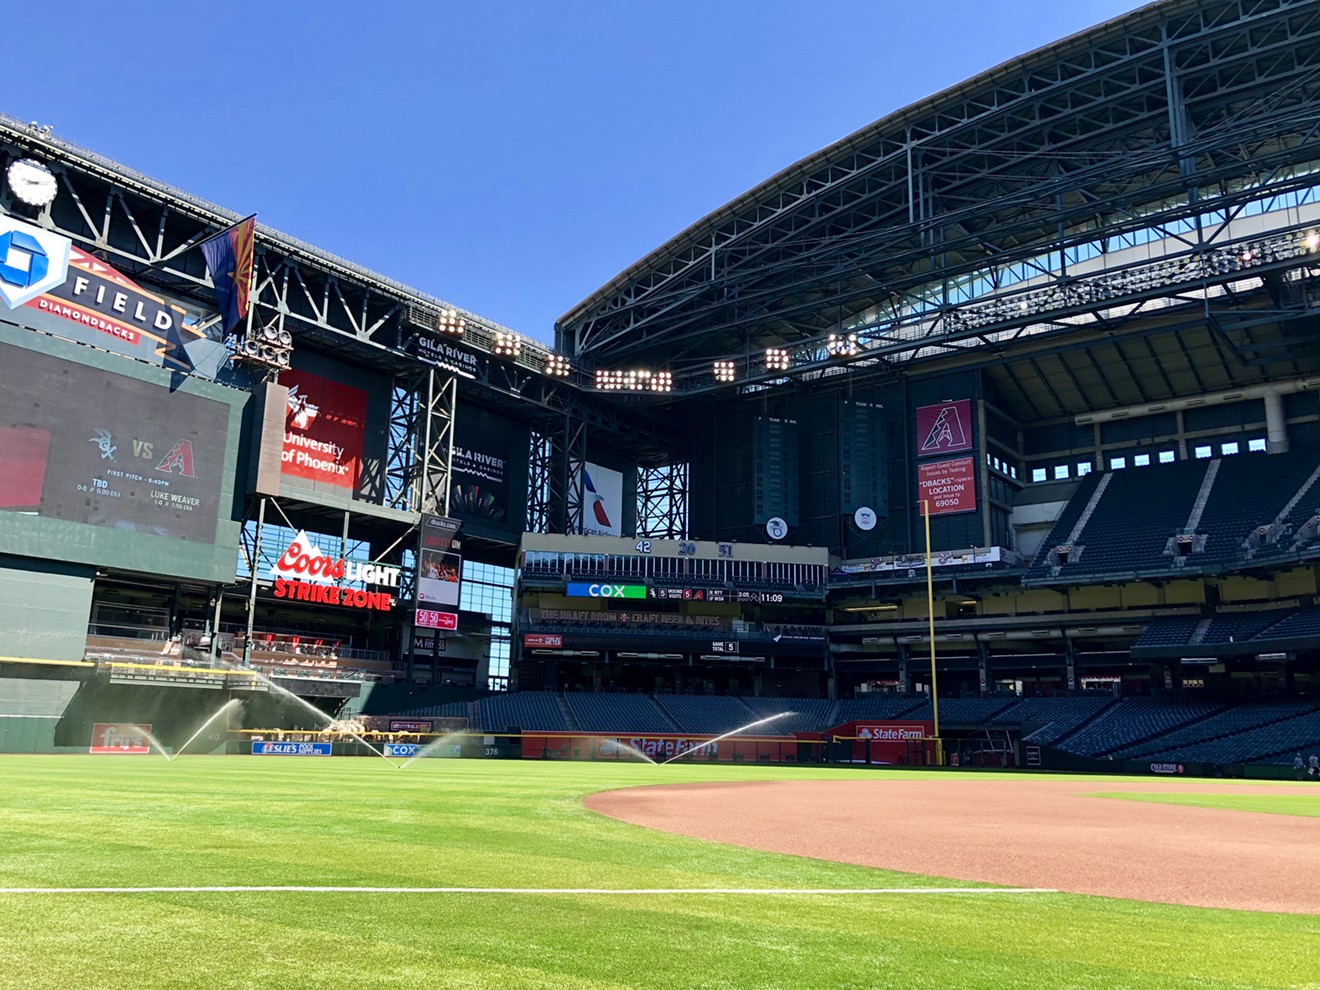 The field at Chase Field.